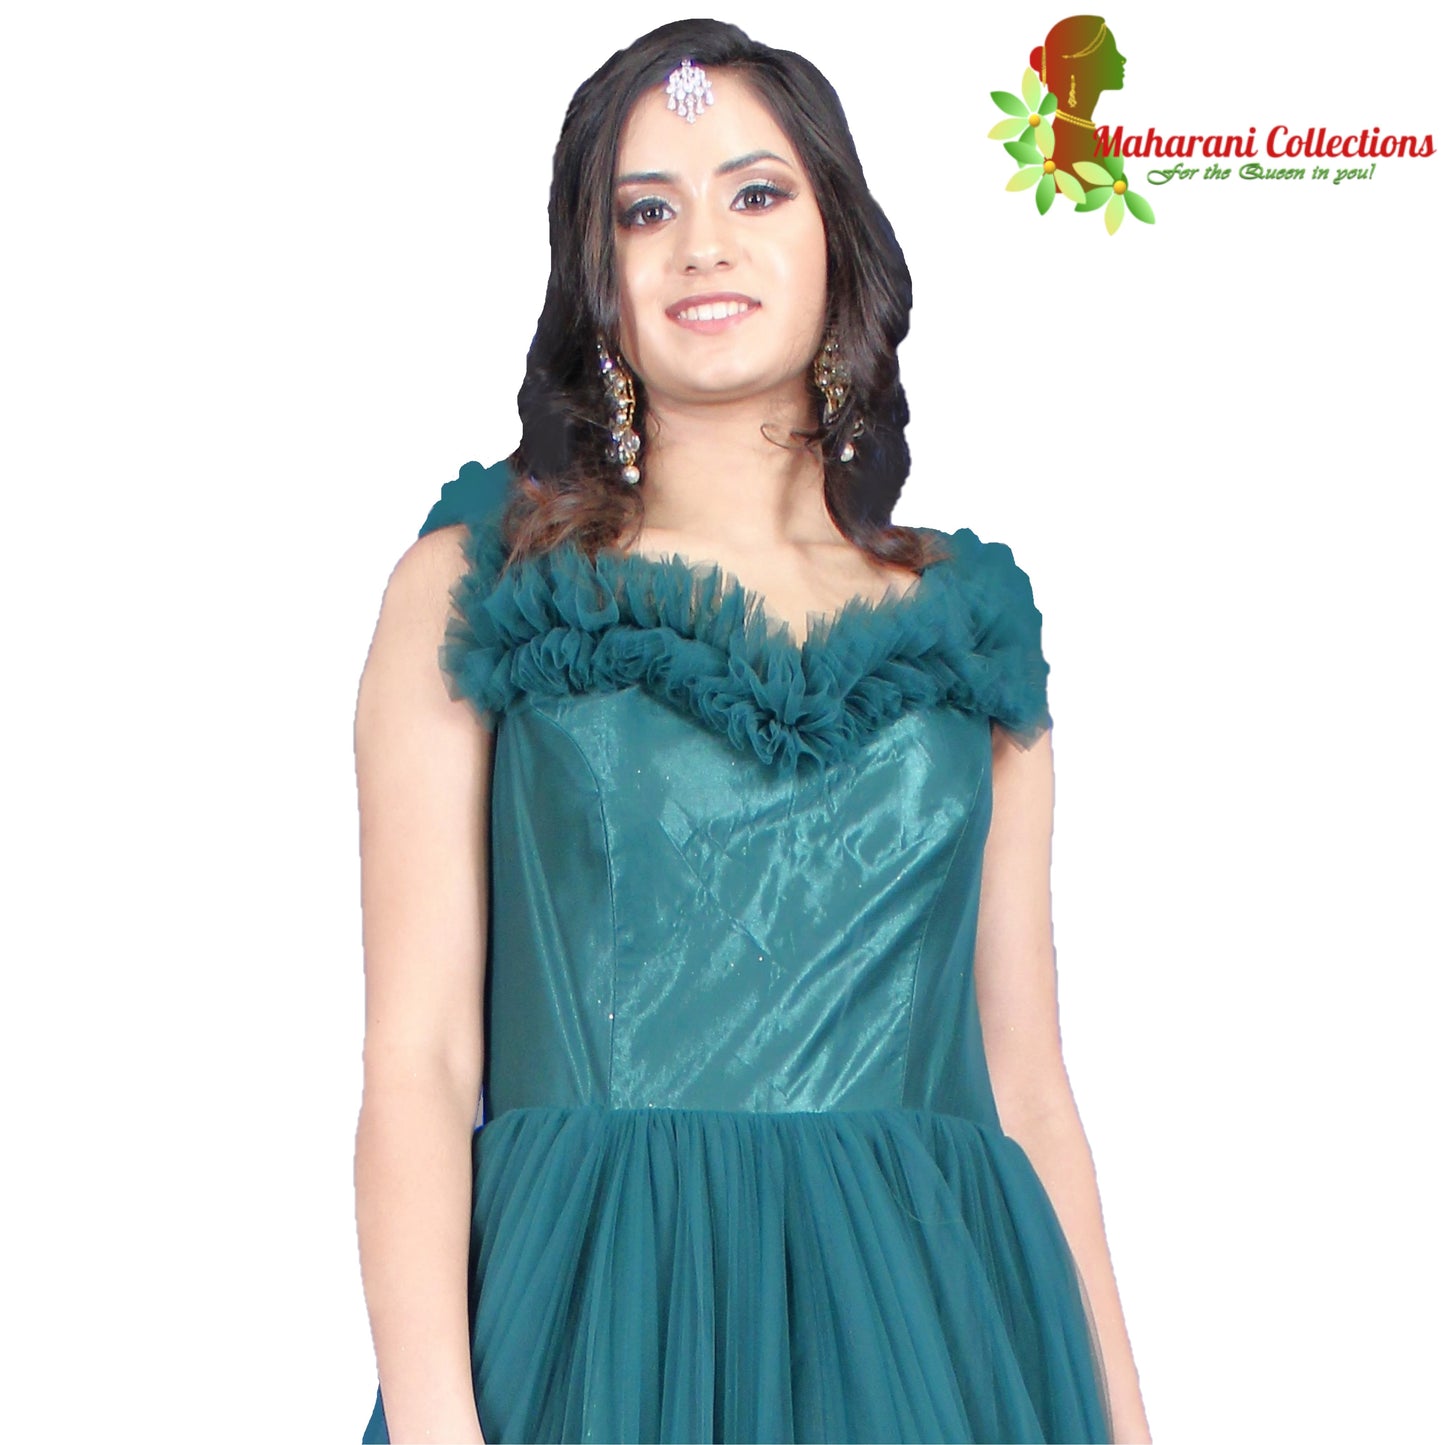 Designer Ball (Princess) Gown - Bottle Green with Floral Net Work